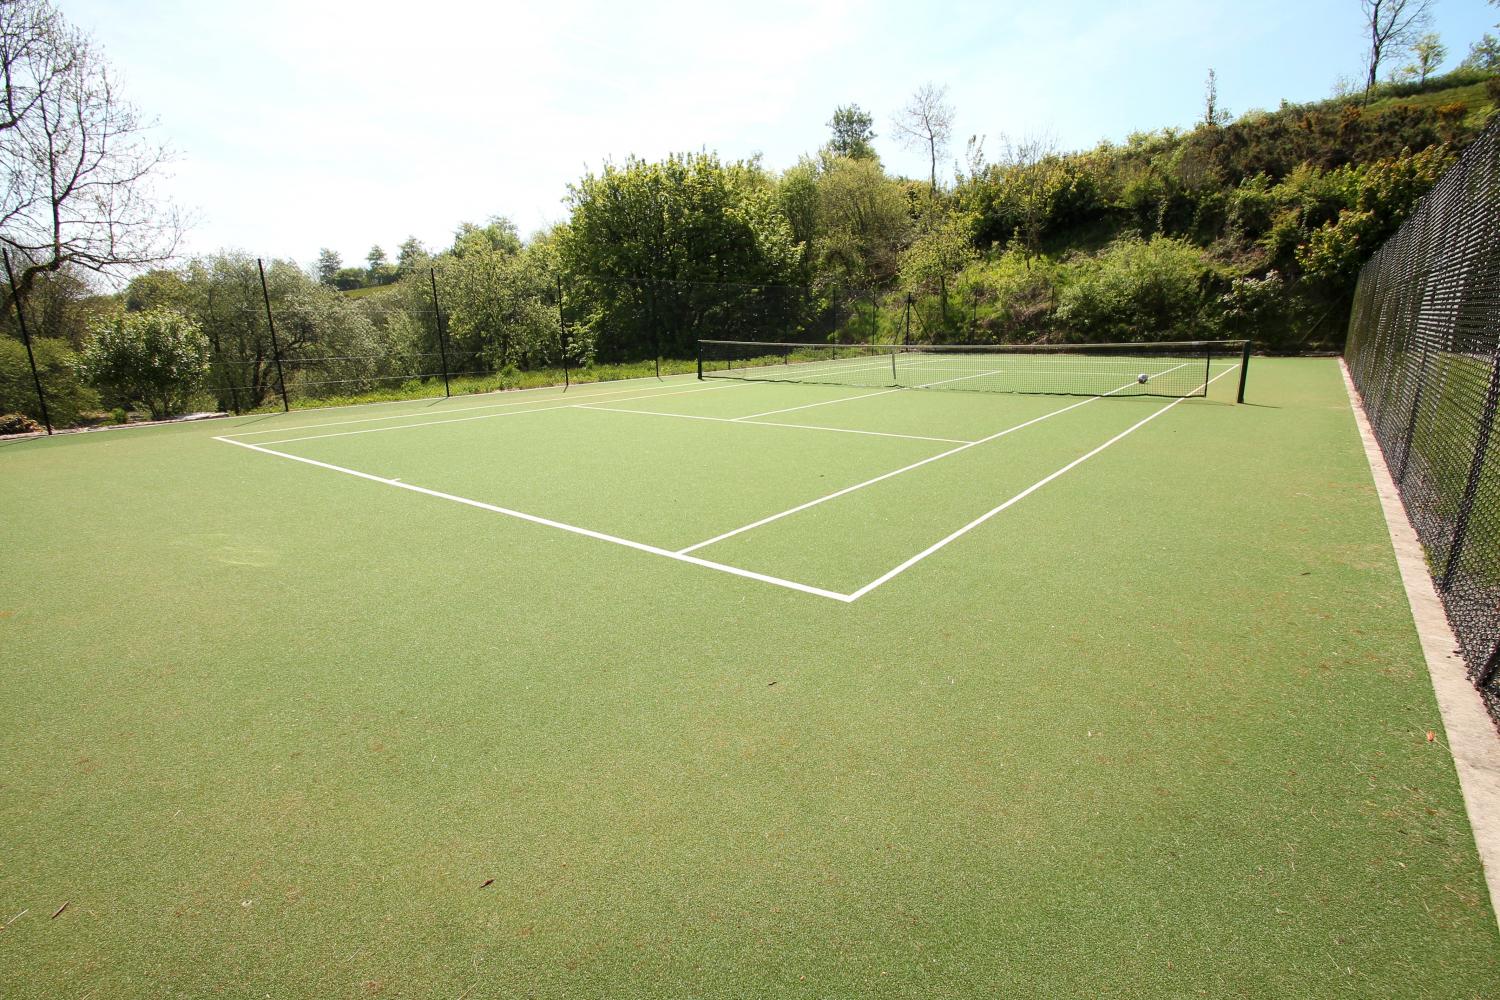 Middle Stolford tennis court for use by our guests